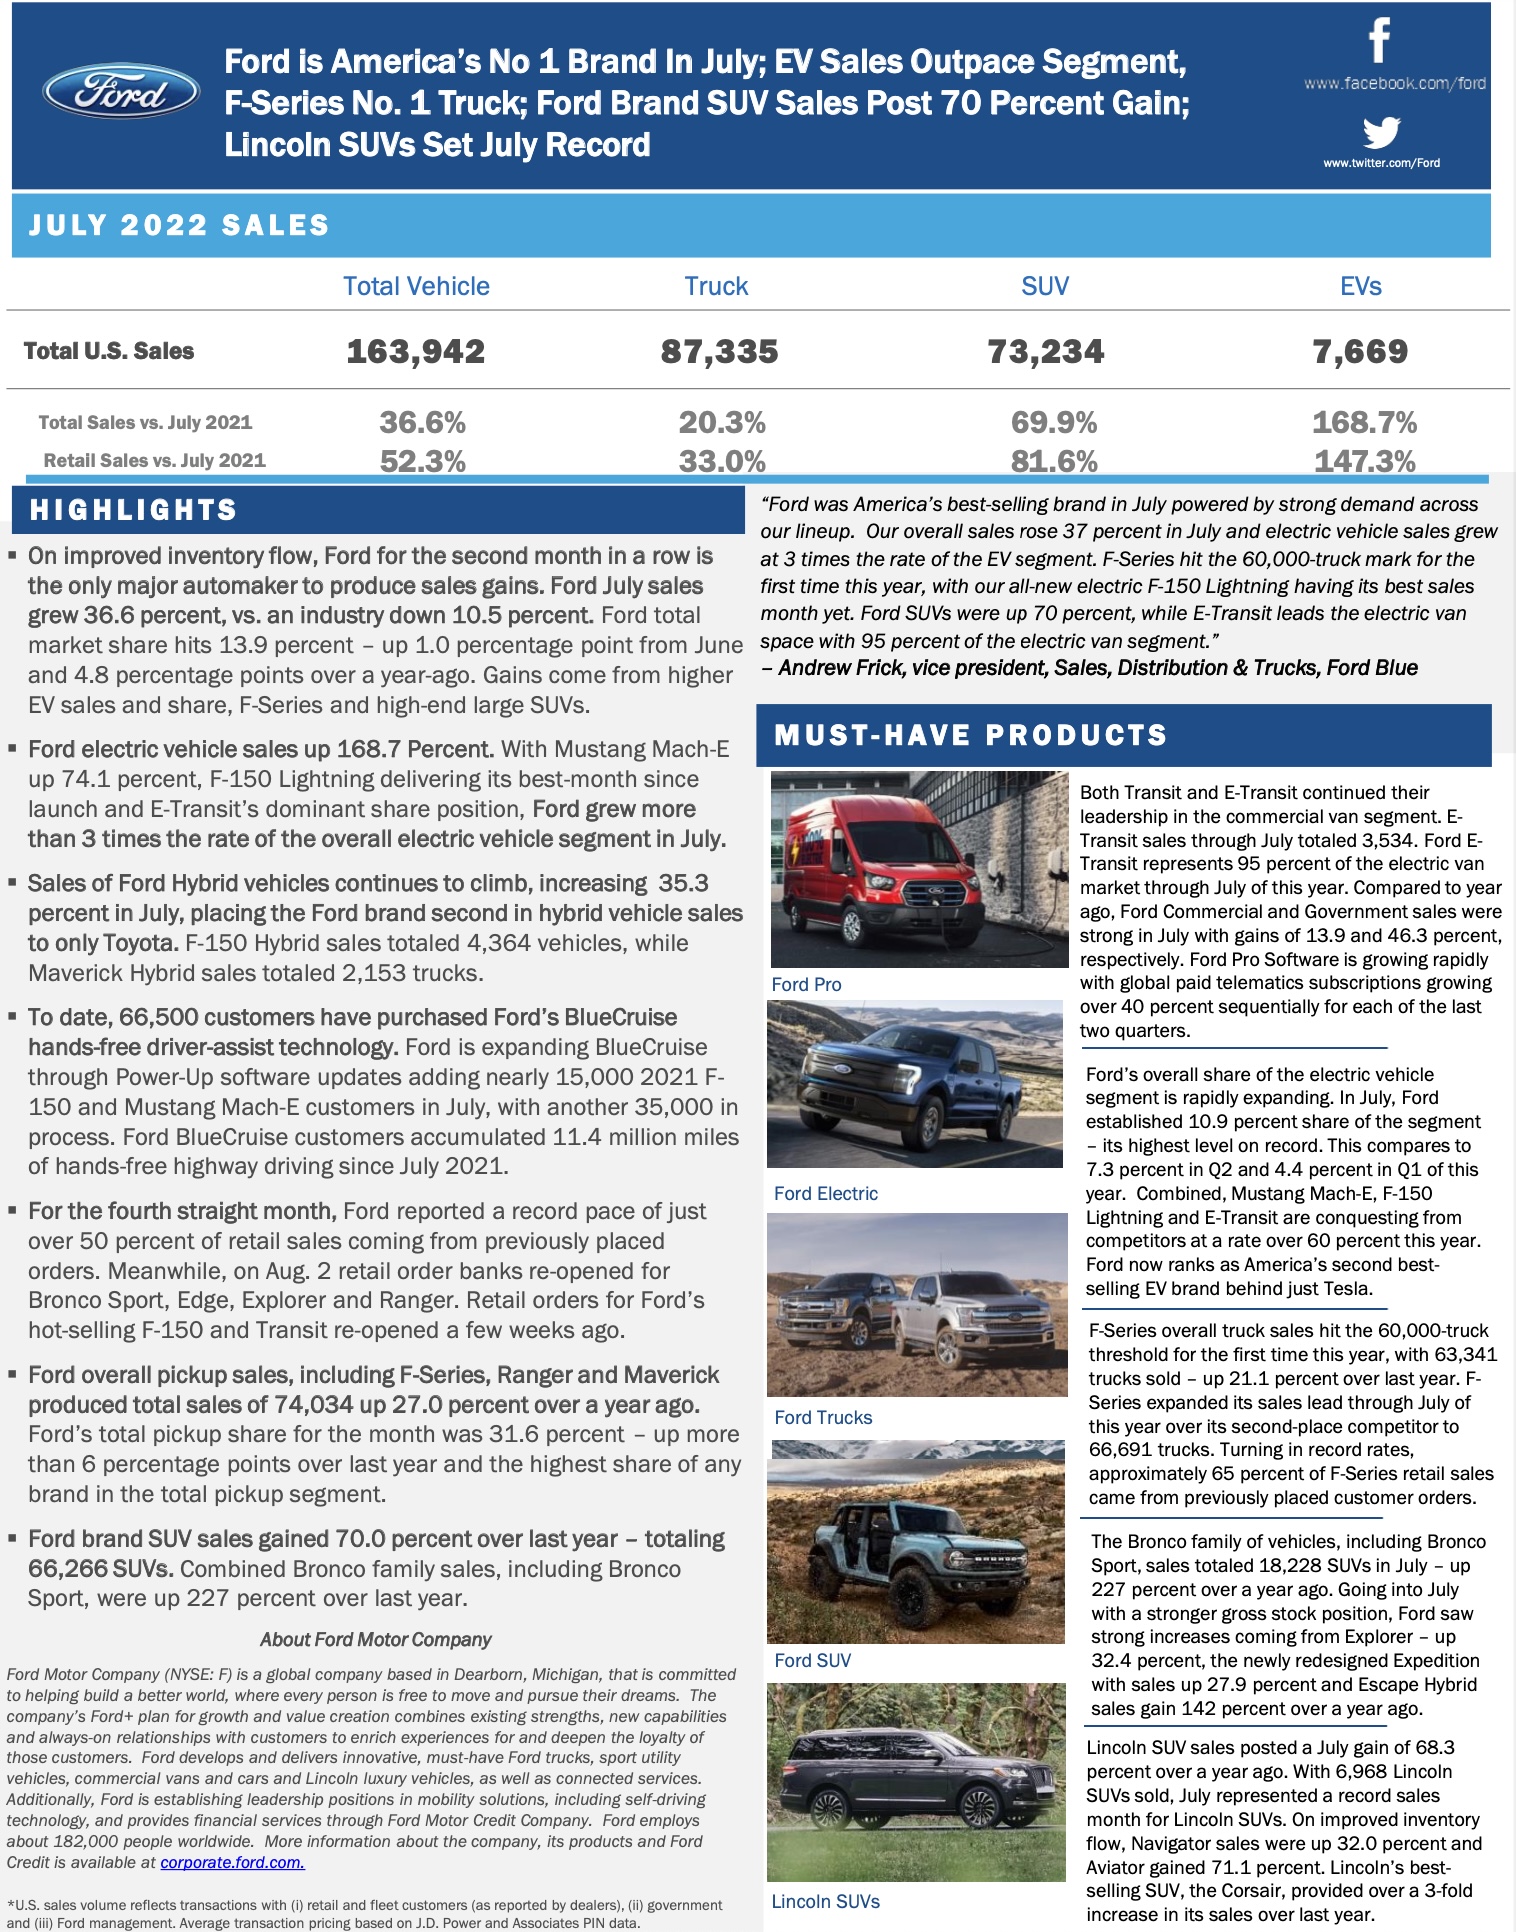 Ford F-150 Lightning 2,173 F-150 Lightnings Were Sold in July 2022 Screen Shot 2022-08-03 at 11.17.22 AM